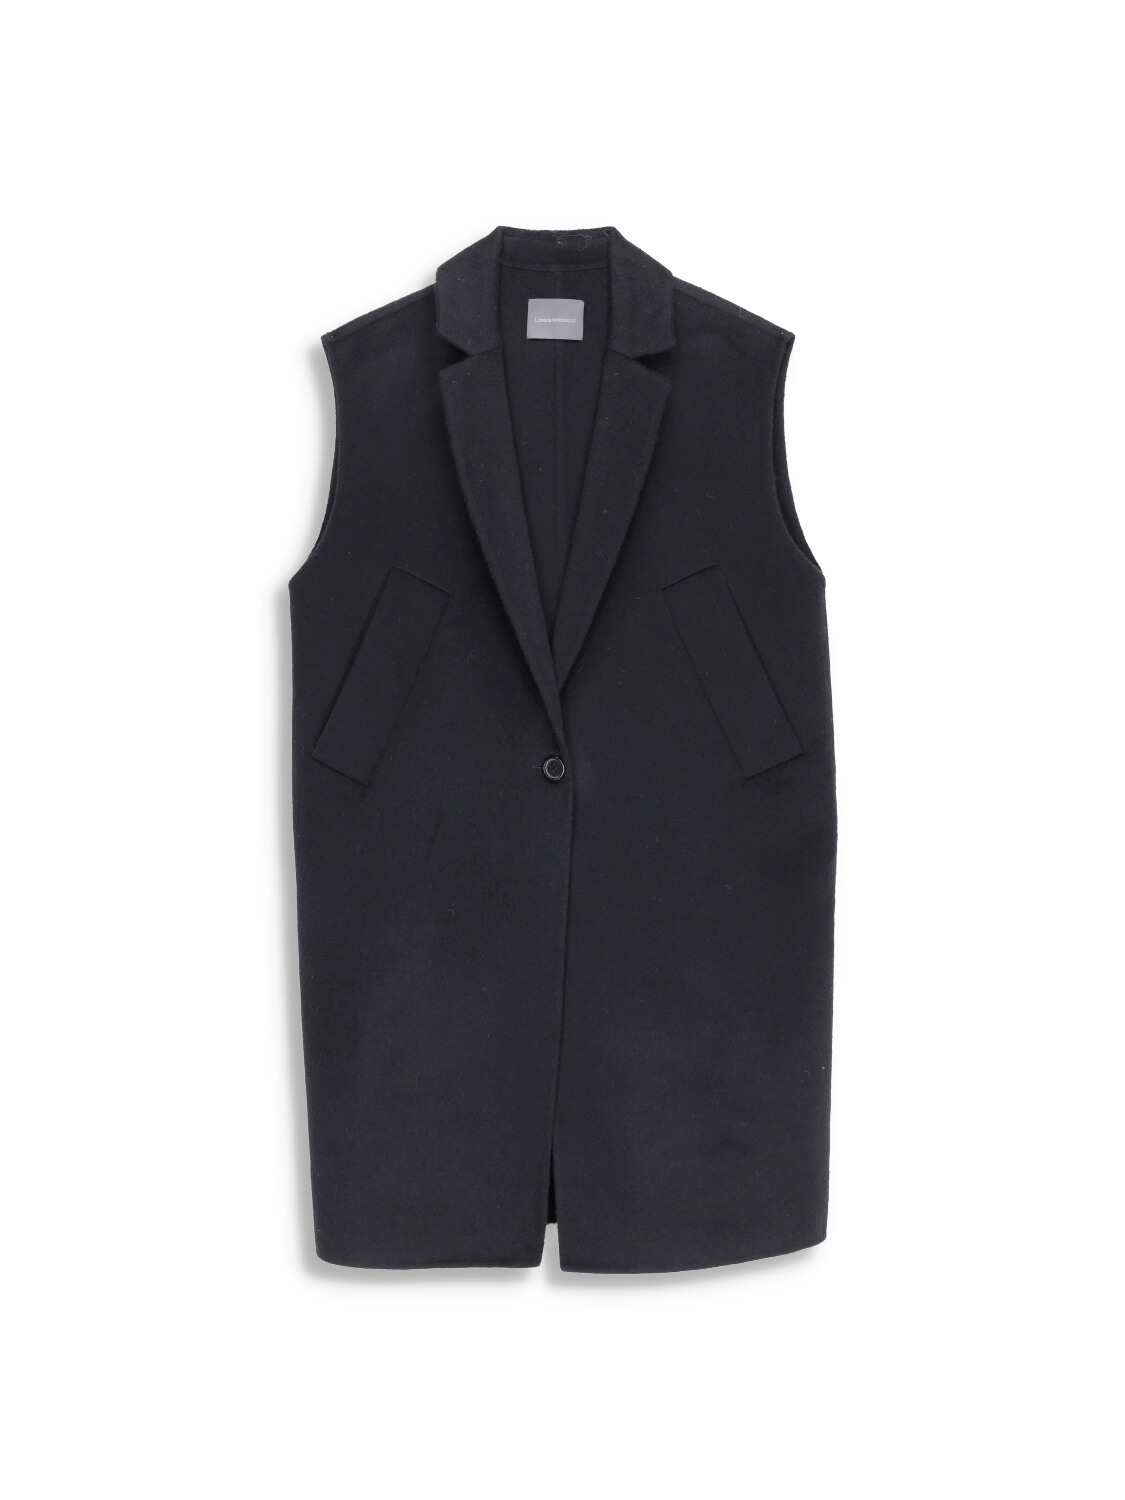 Gilet with button closure in virgin wool